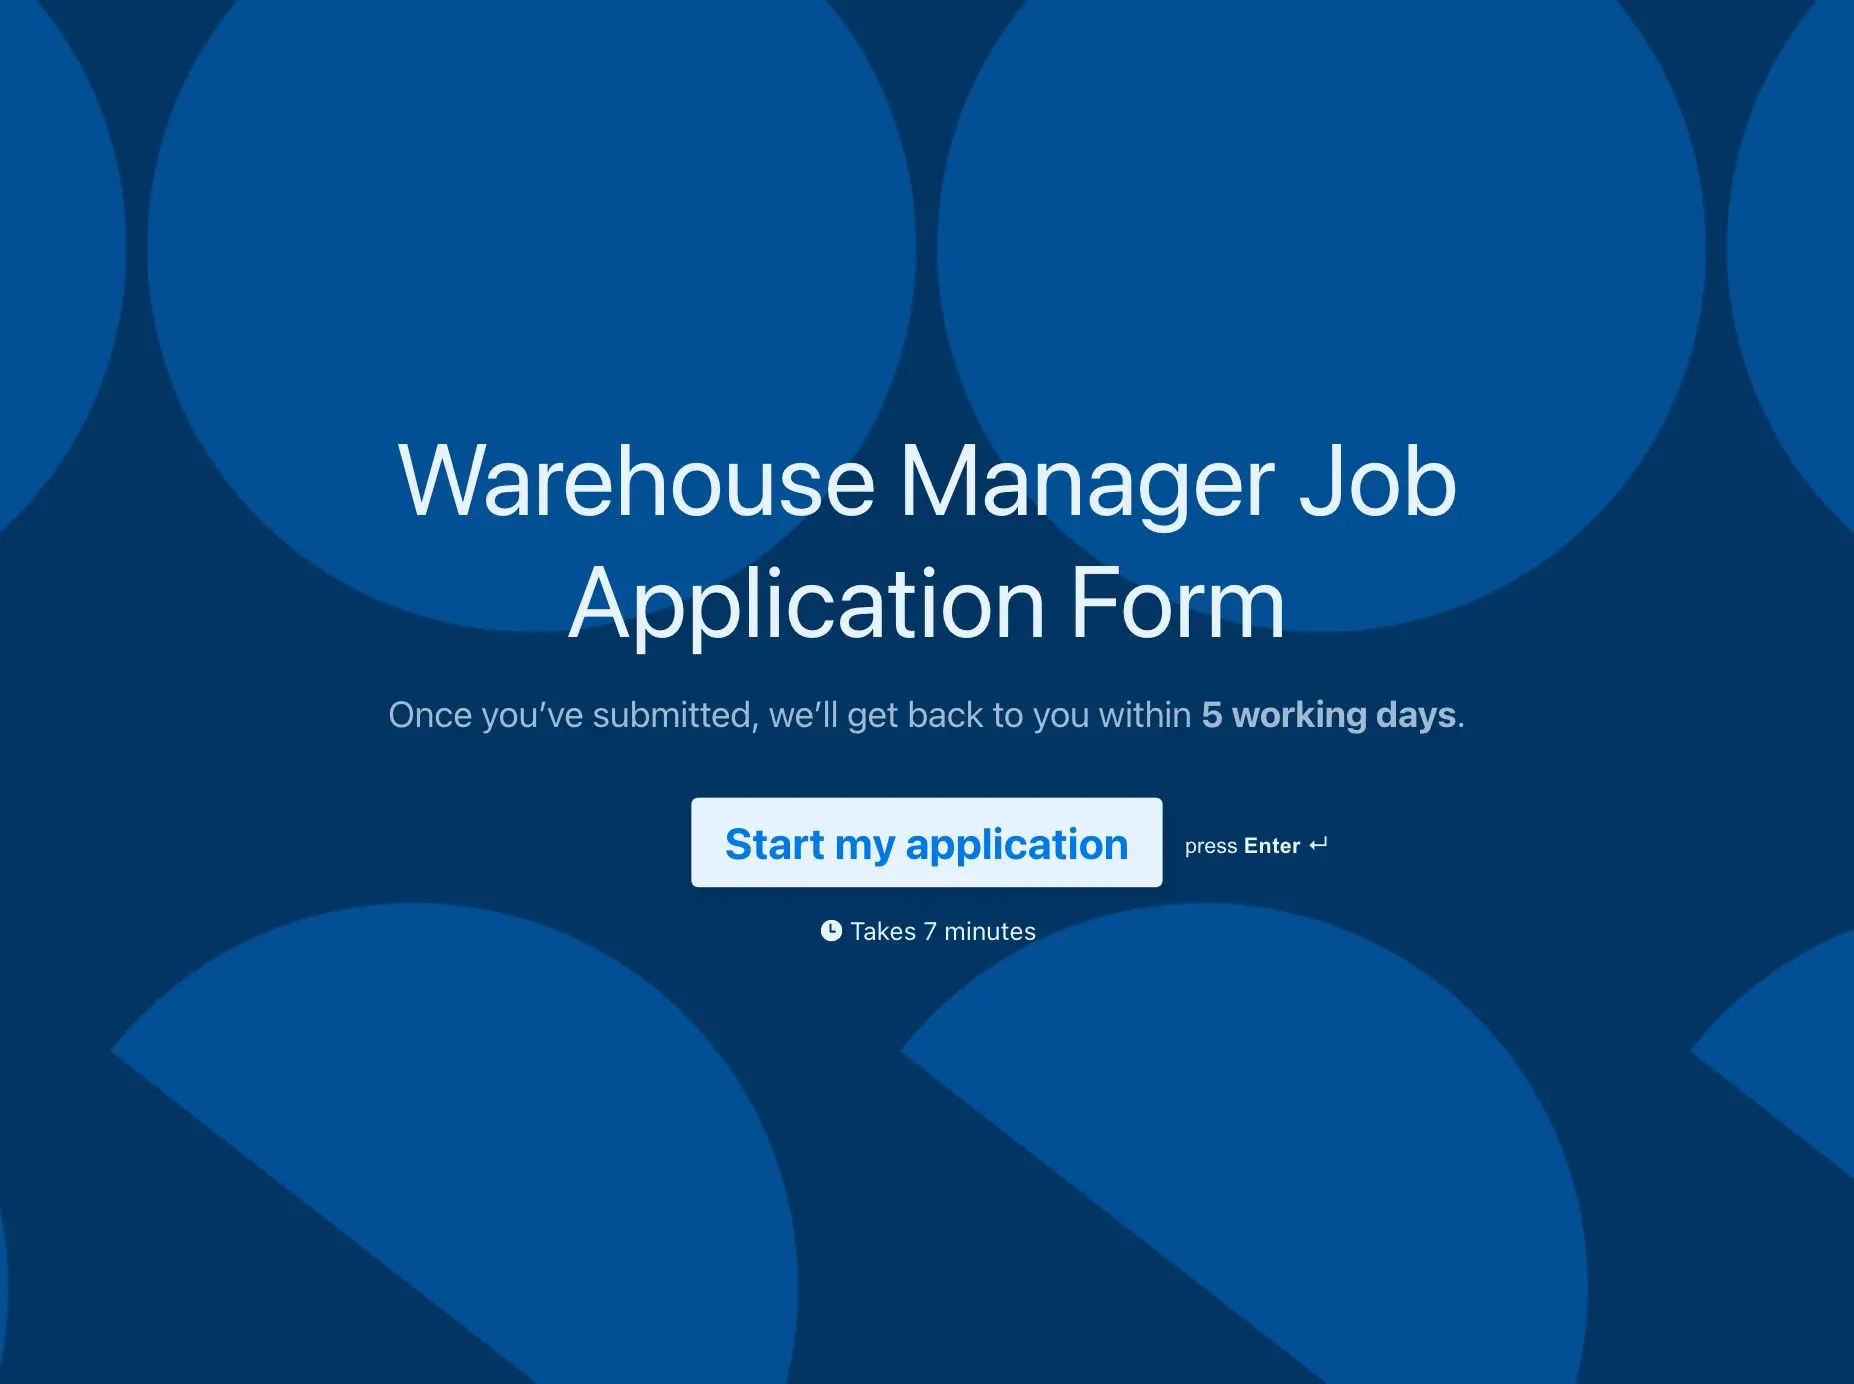 Warehouse Manager Job Application Form Template Hero